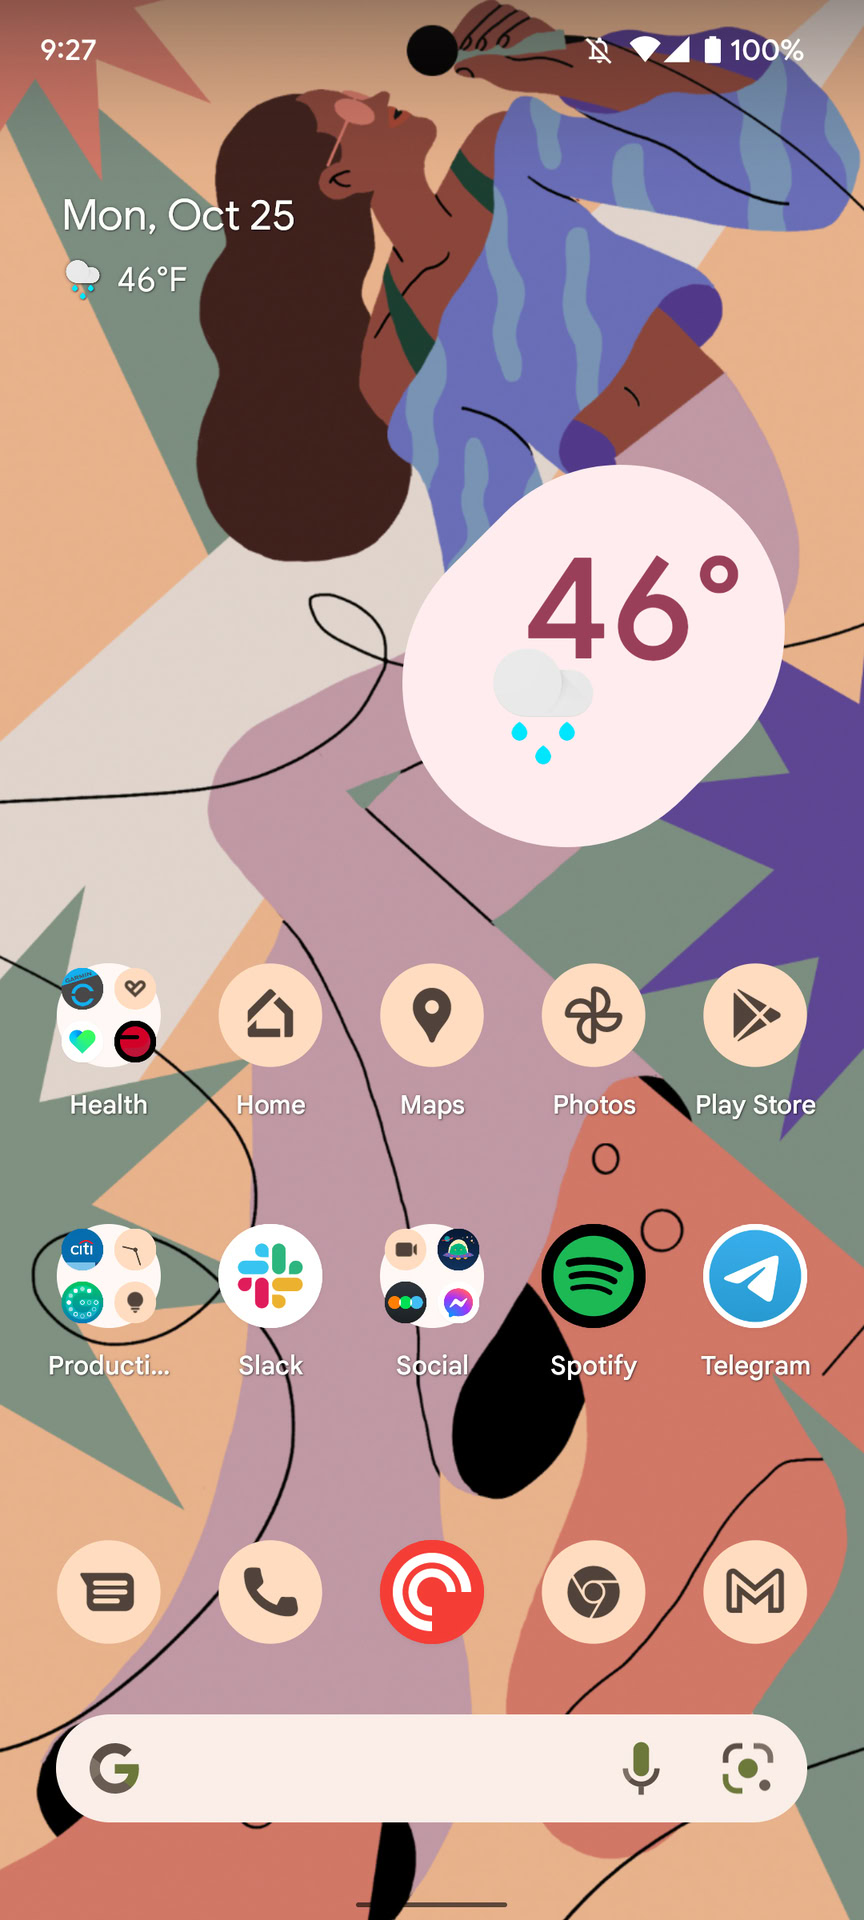 A screenshot of the Google Pixel 6 Android 12 home screen